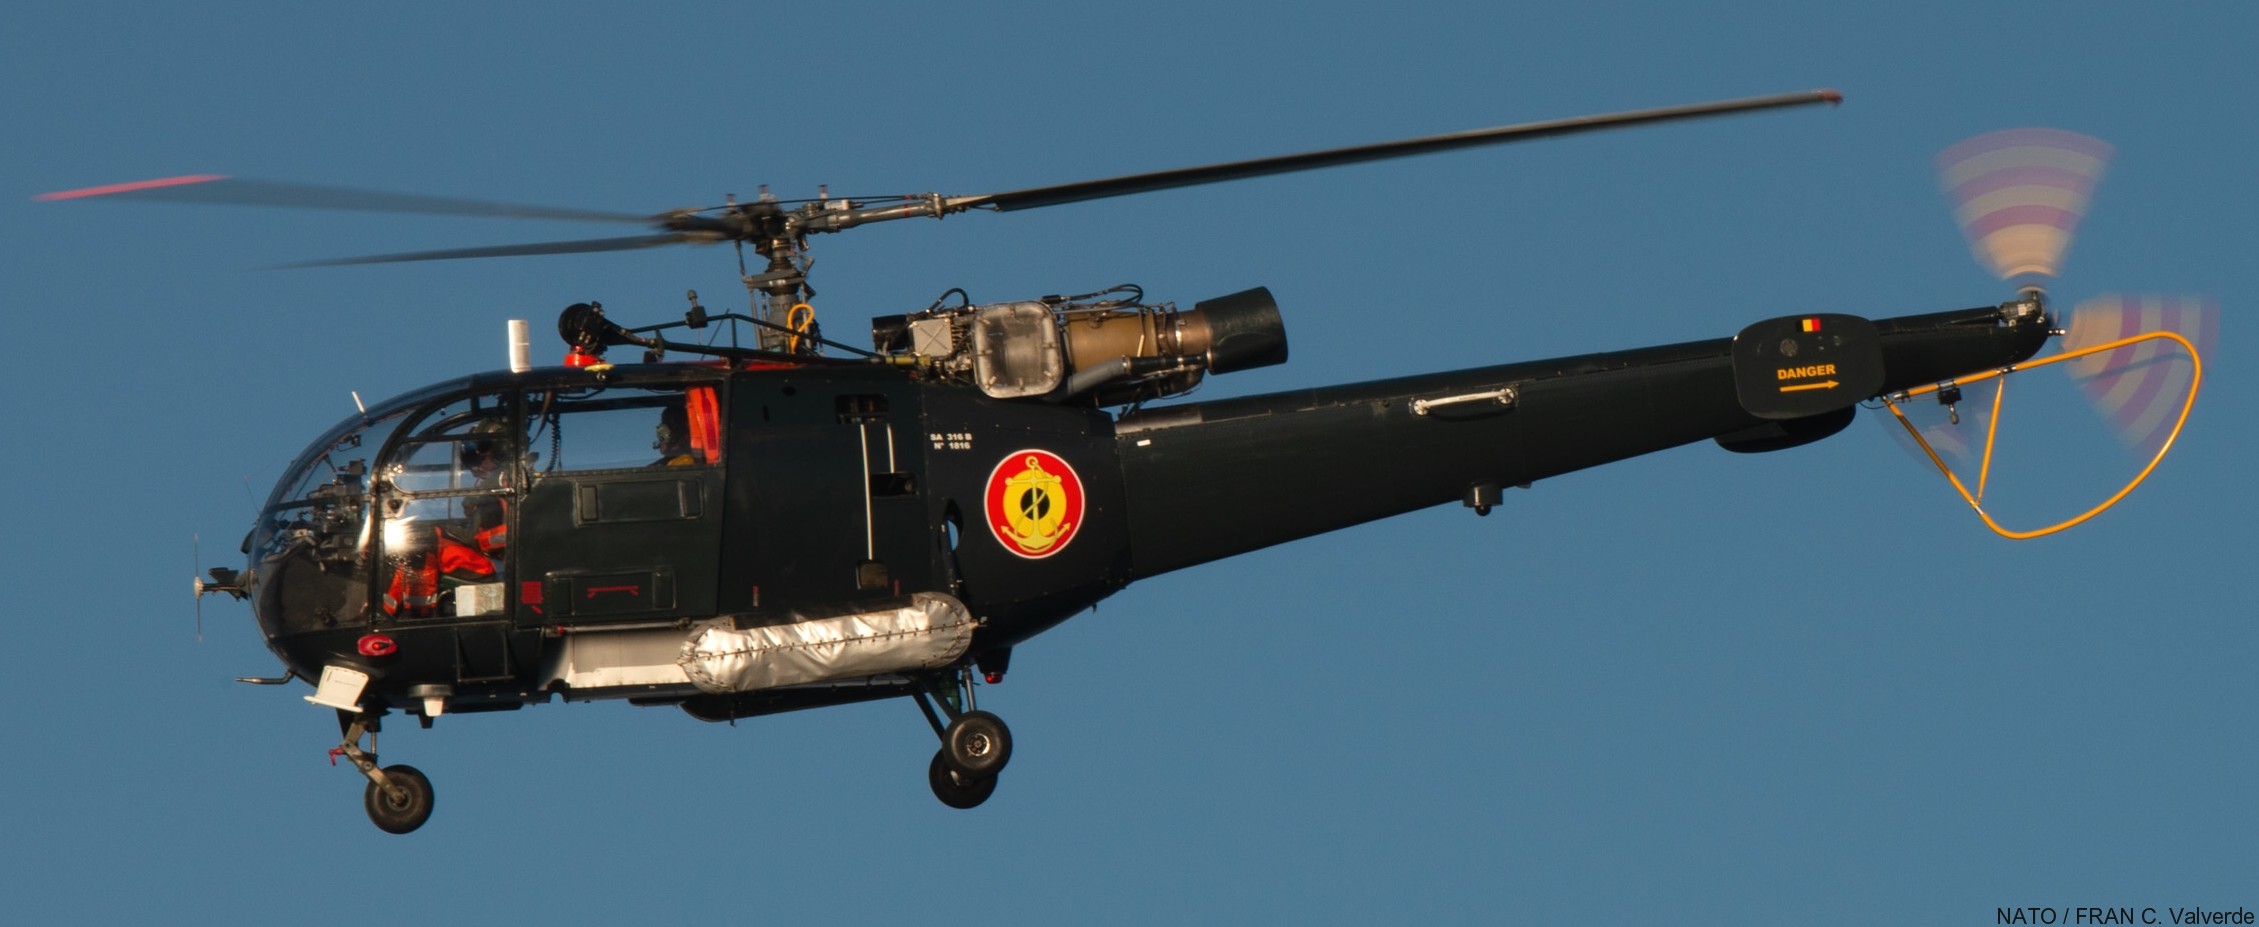 sa-316b alouette iii helicopter belgian armed forces naval component navy 04